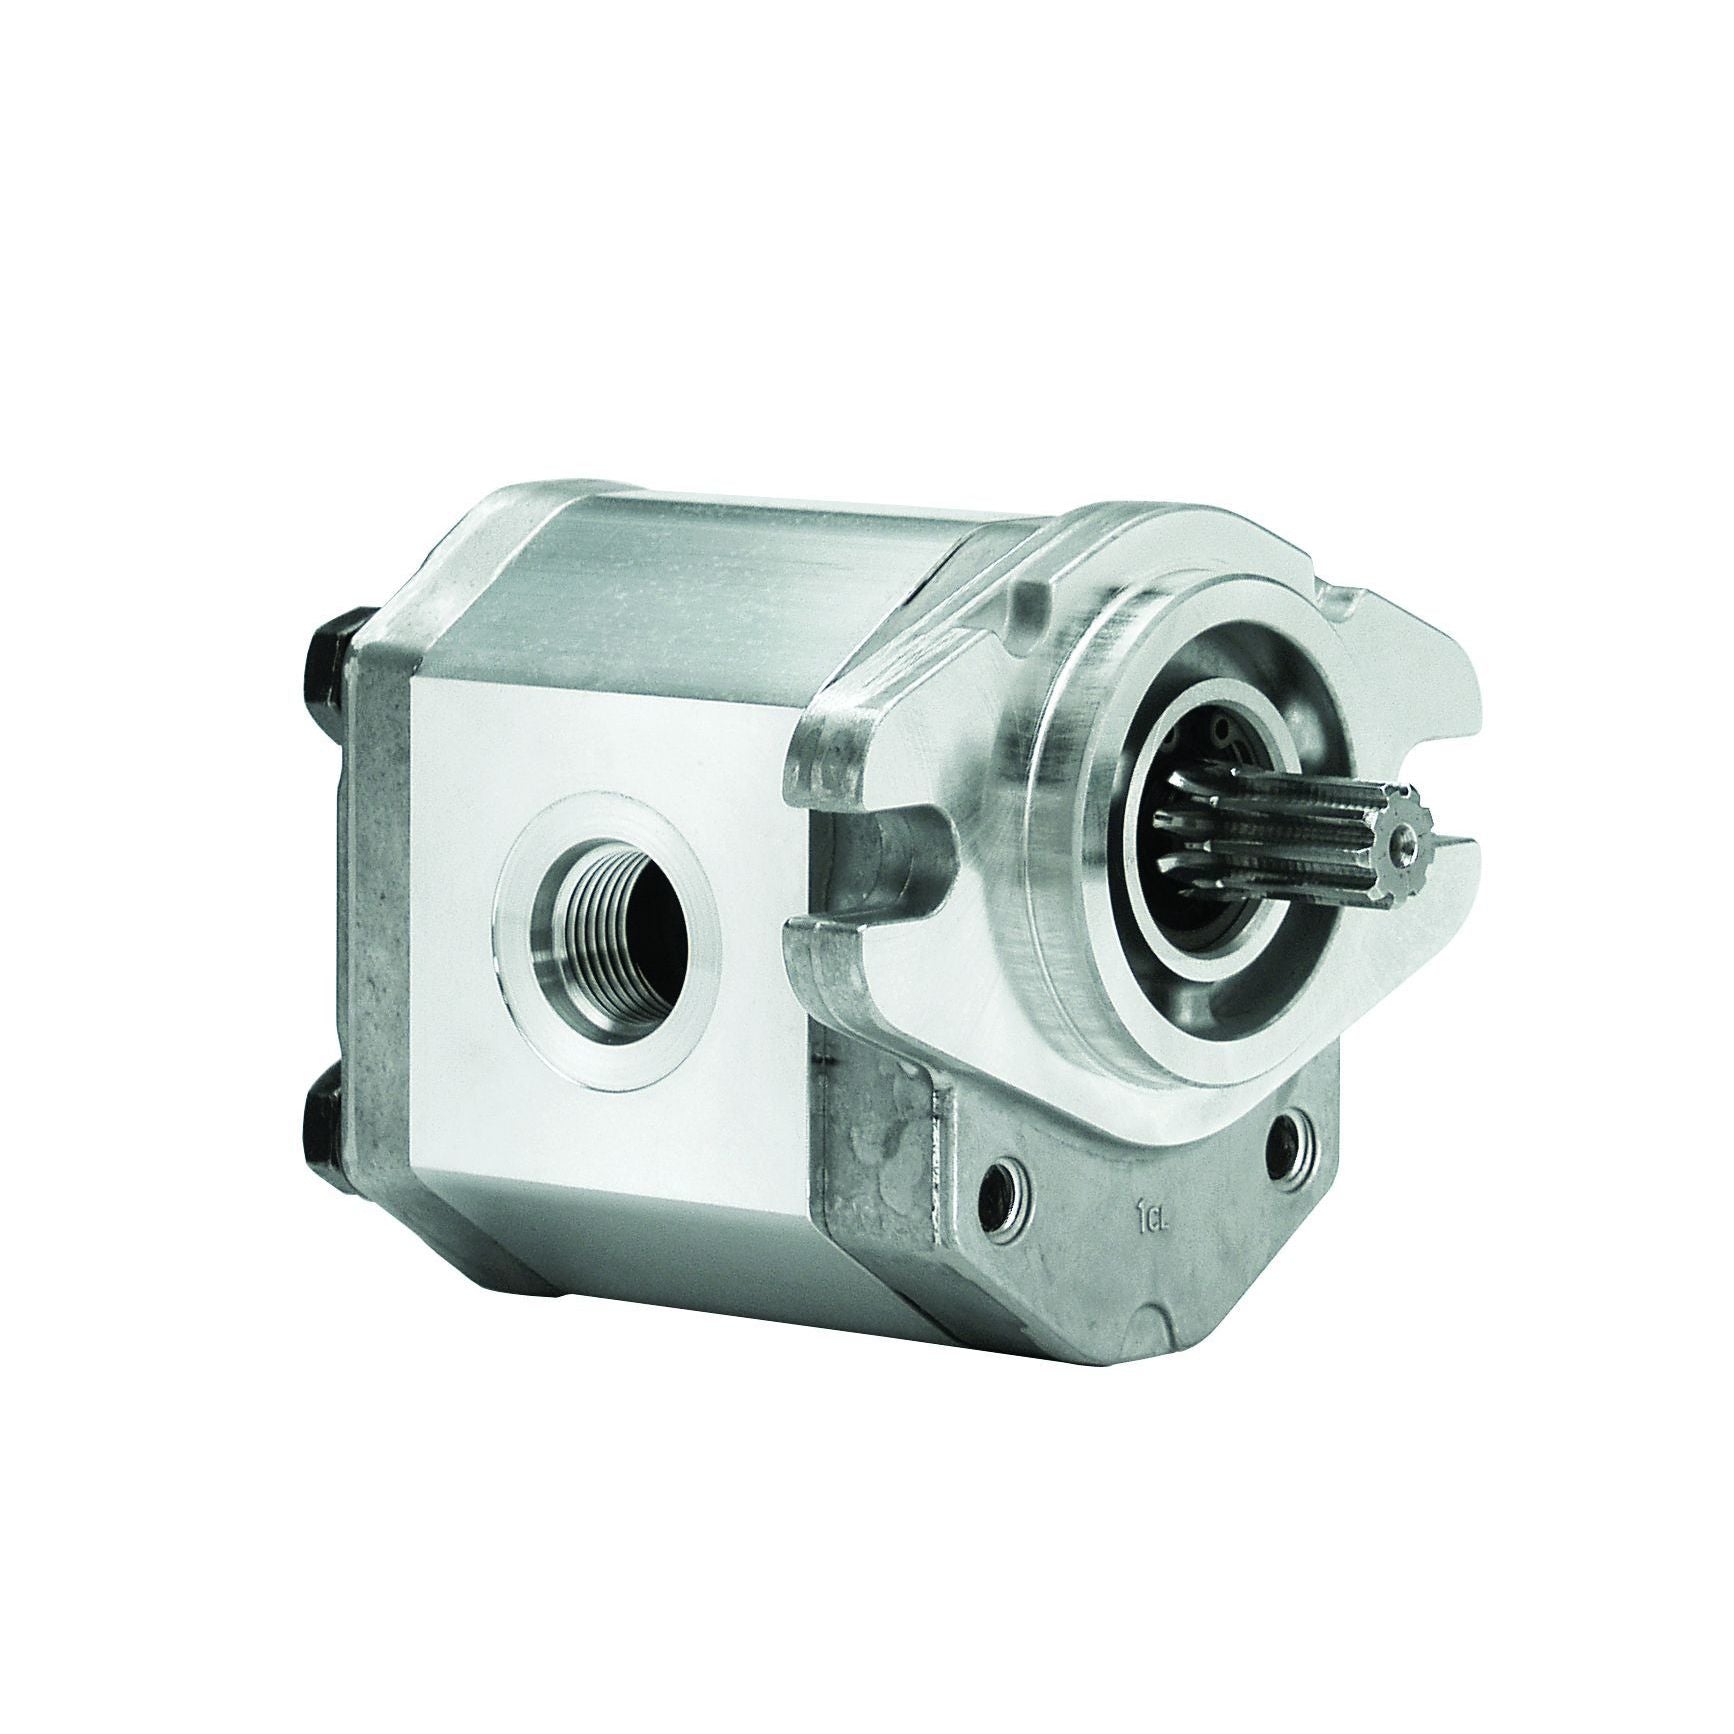 ALP2A-S-34-S1 : Marzocchi Gear Pump, CCW, 23.7cc (1.4457in3), 11.27 GPM, 2610psi, 2000 RPM, #12 SAE (3/4") In, #10 SAE (5/8") Out, Splined Shaft 9T 16/32DP, SAE A 2-Bolt Mount